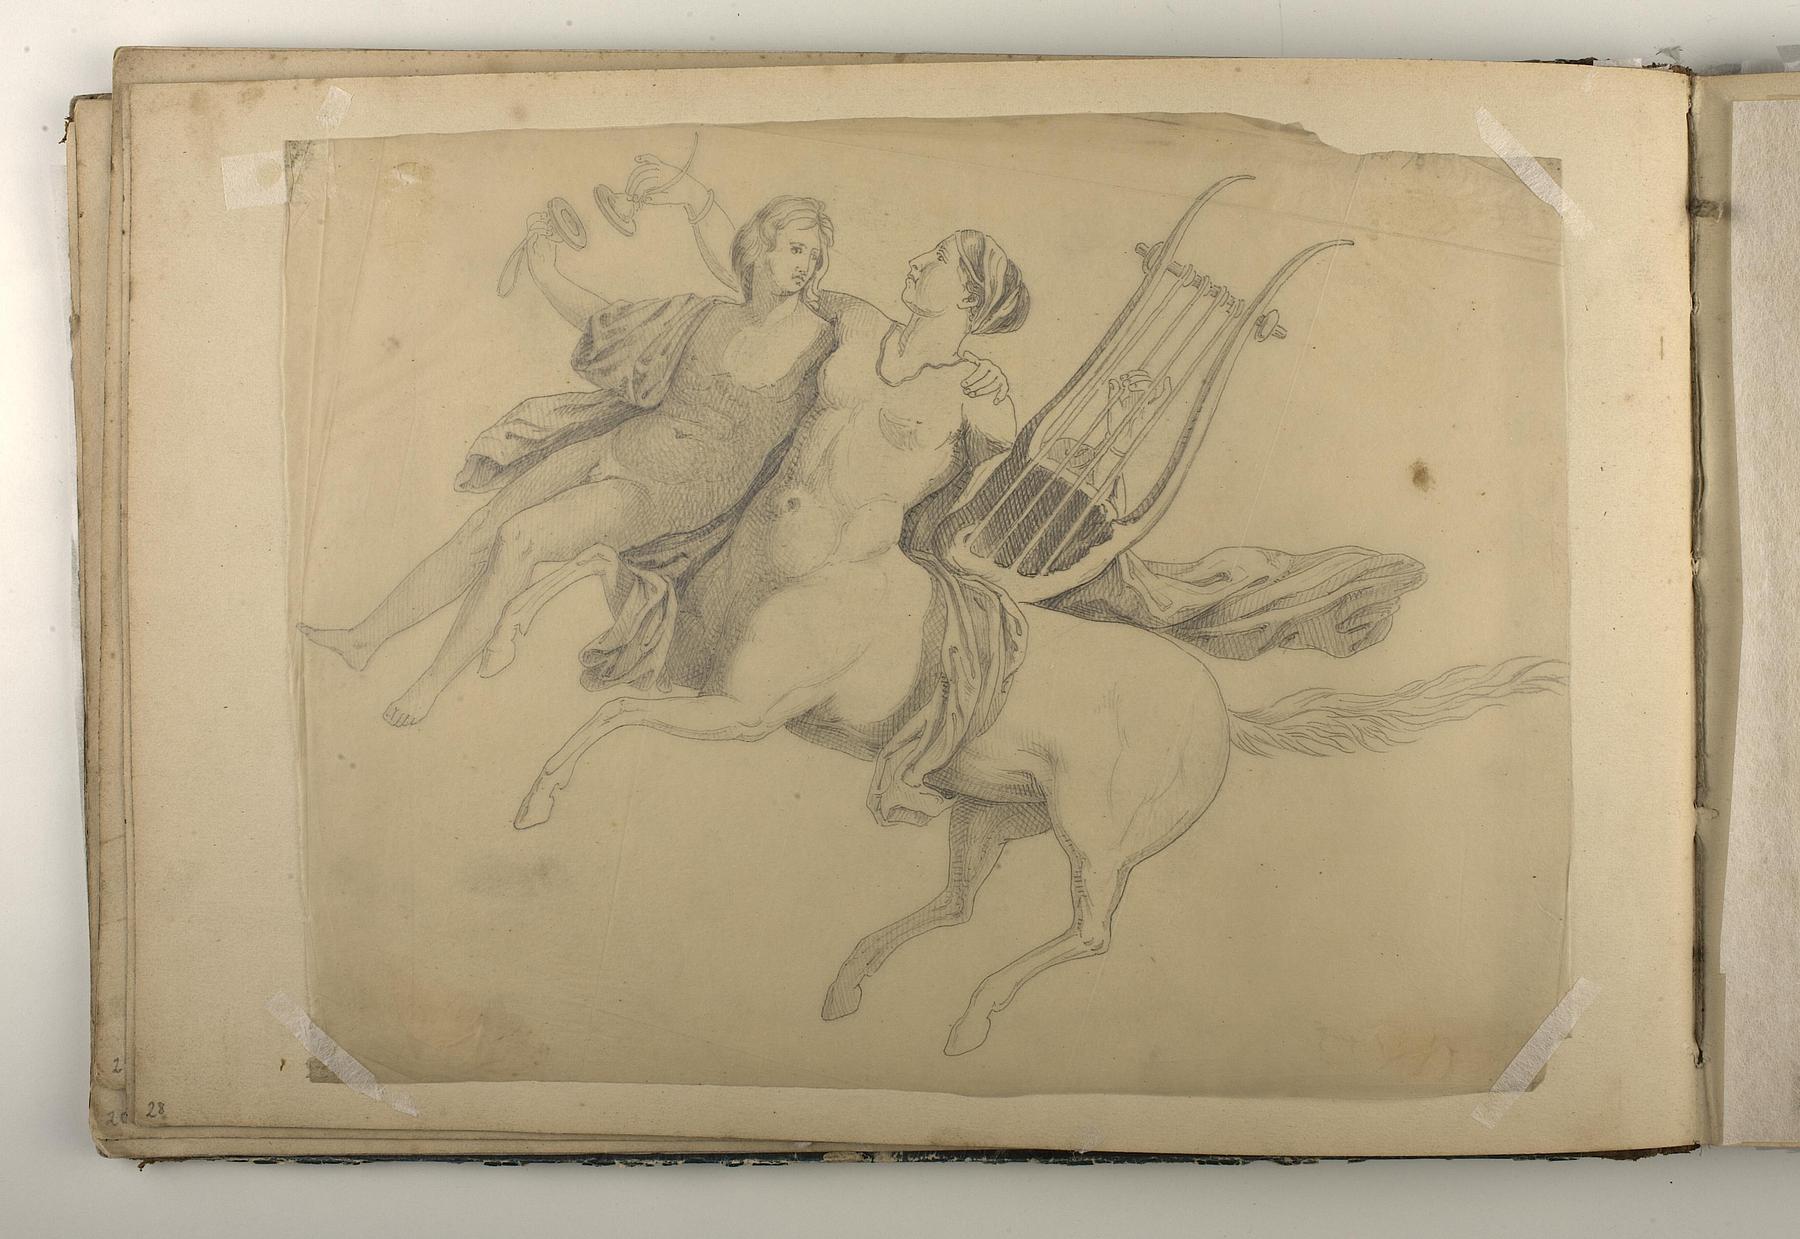 Female Centaur with a Lyre lifts a Young Man, D1827,28